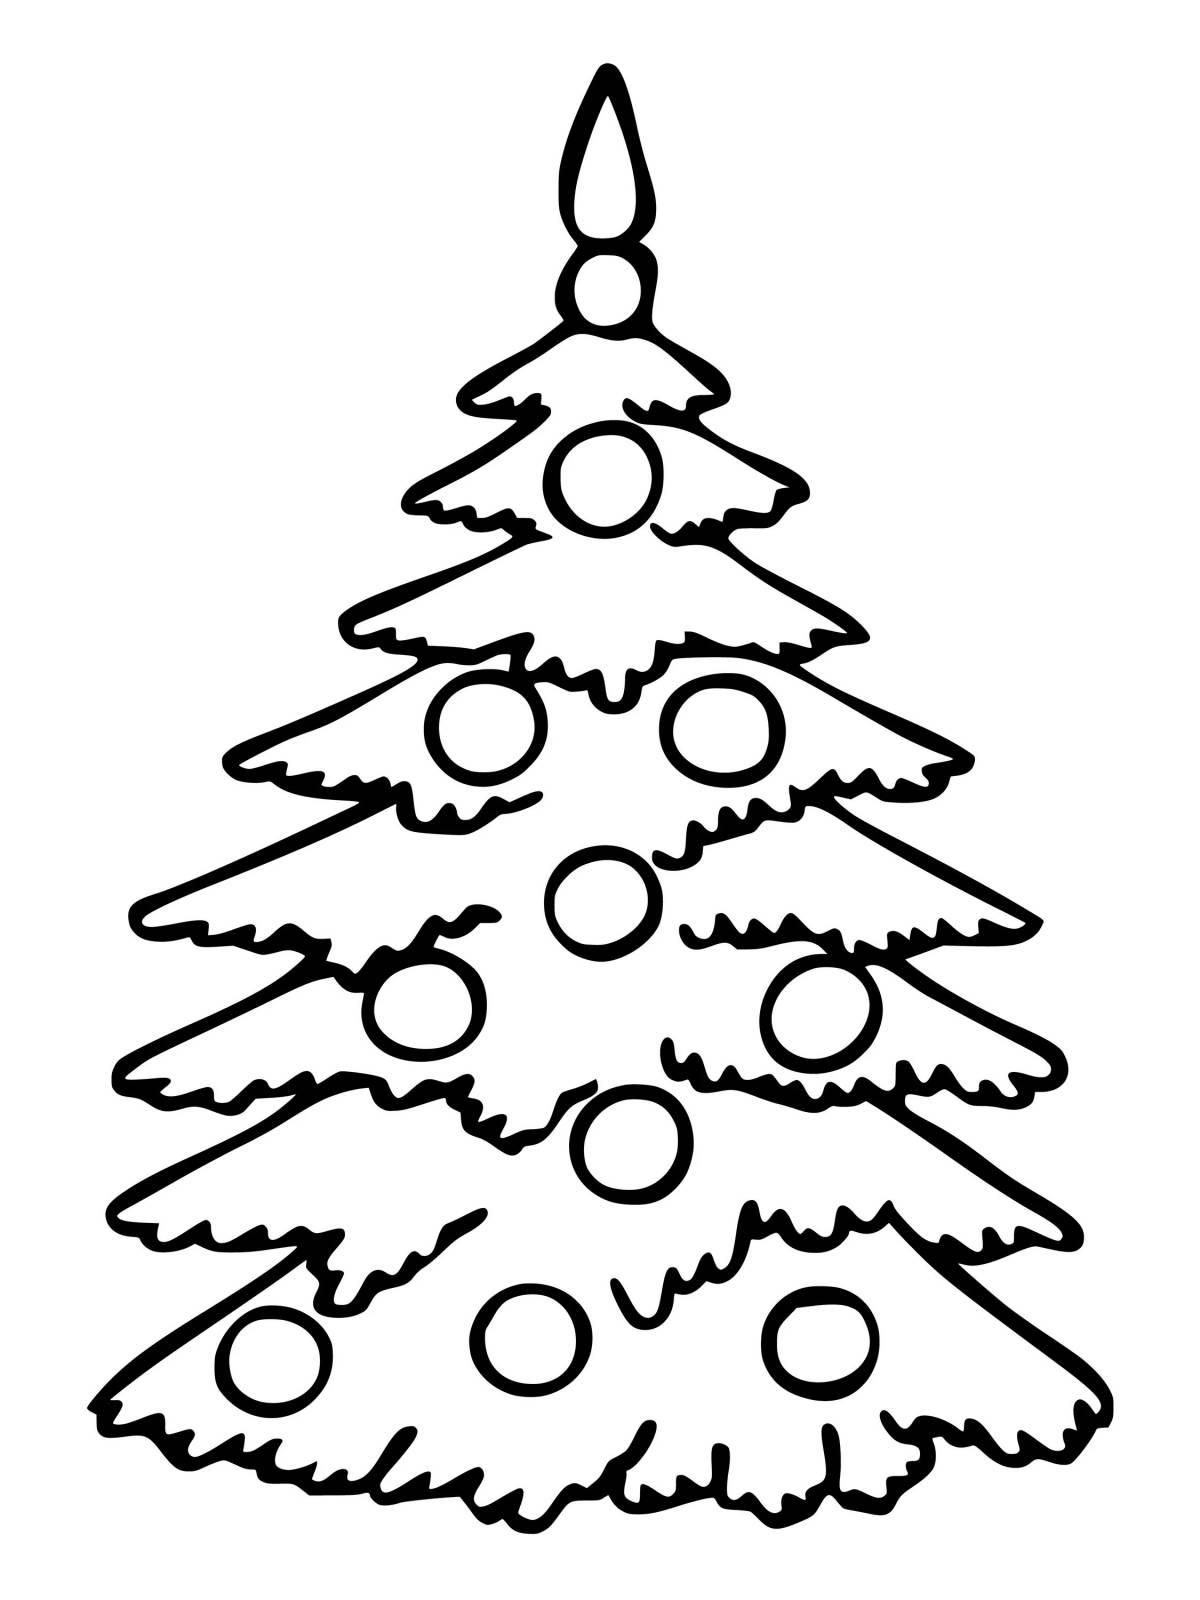 Exciting Christmas tree drawing for kids